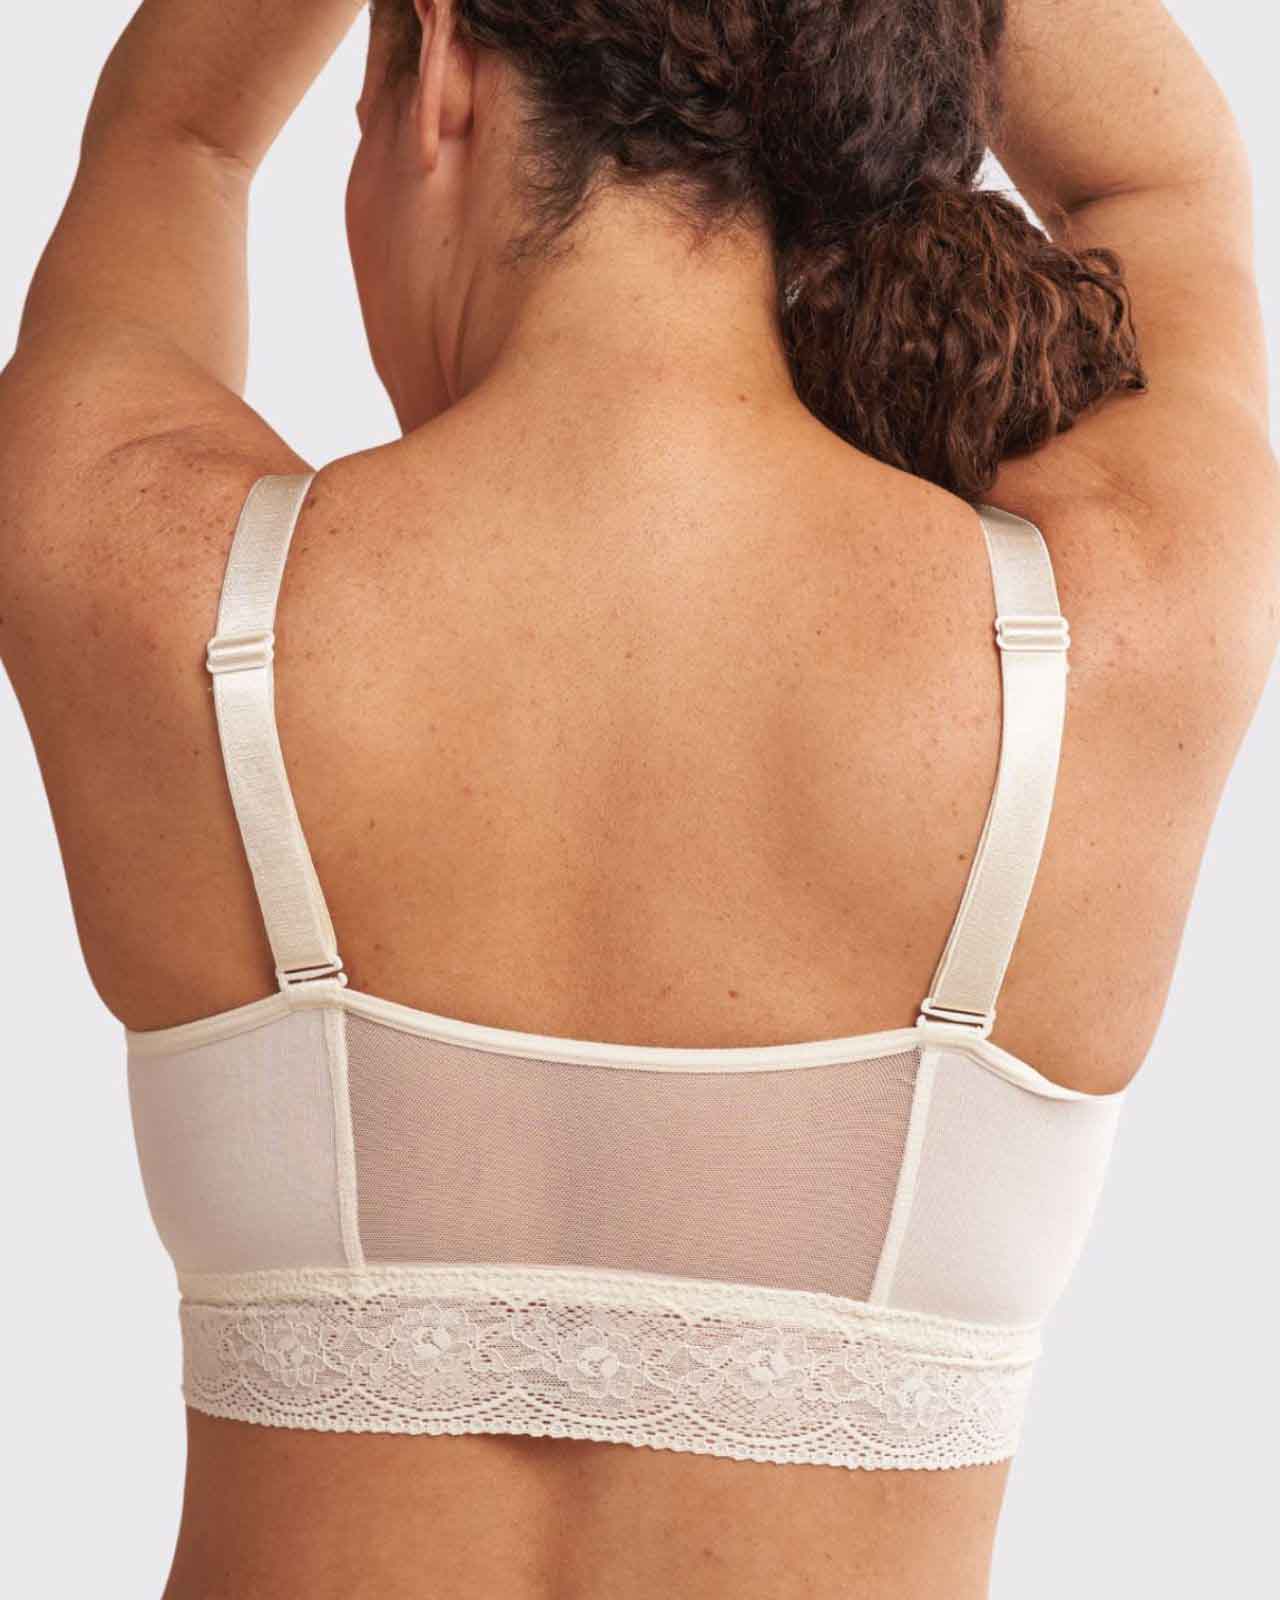 Delilah - Women's Organic Cotton Wireless T-Shirt Bra, Removable Pads -  AAA, AA, A for Small Boobs - Tagless